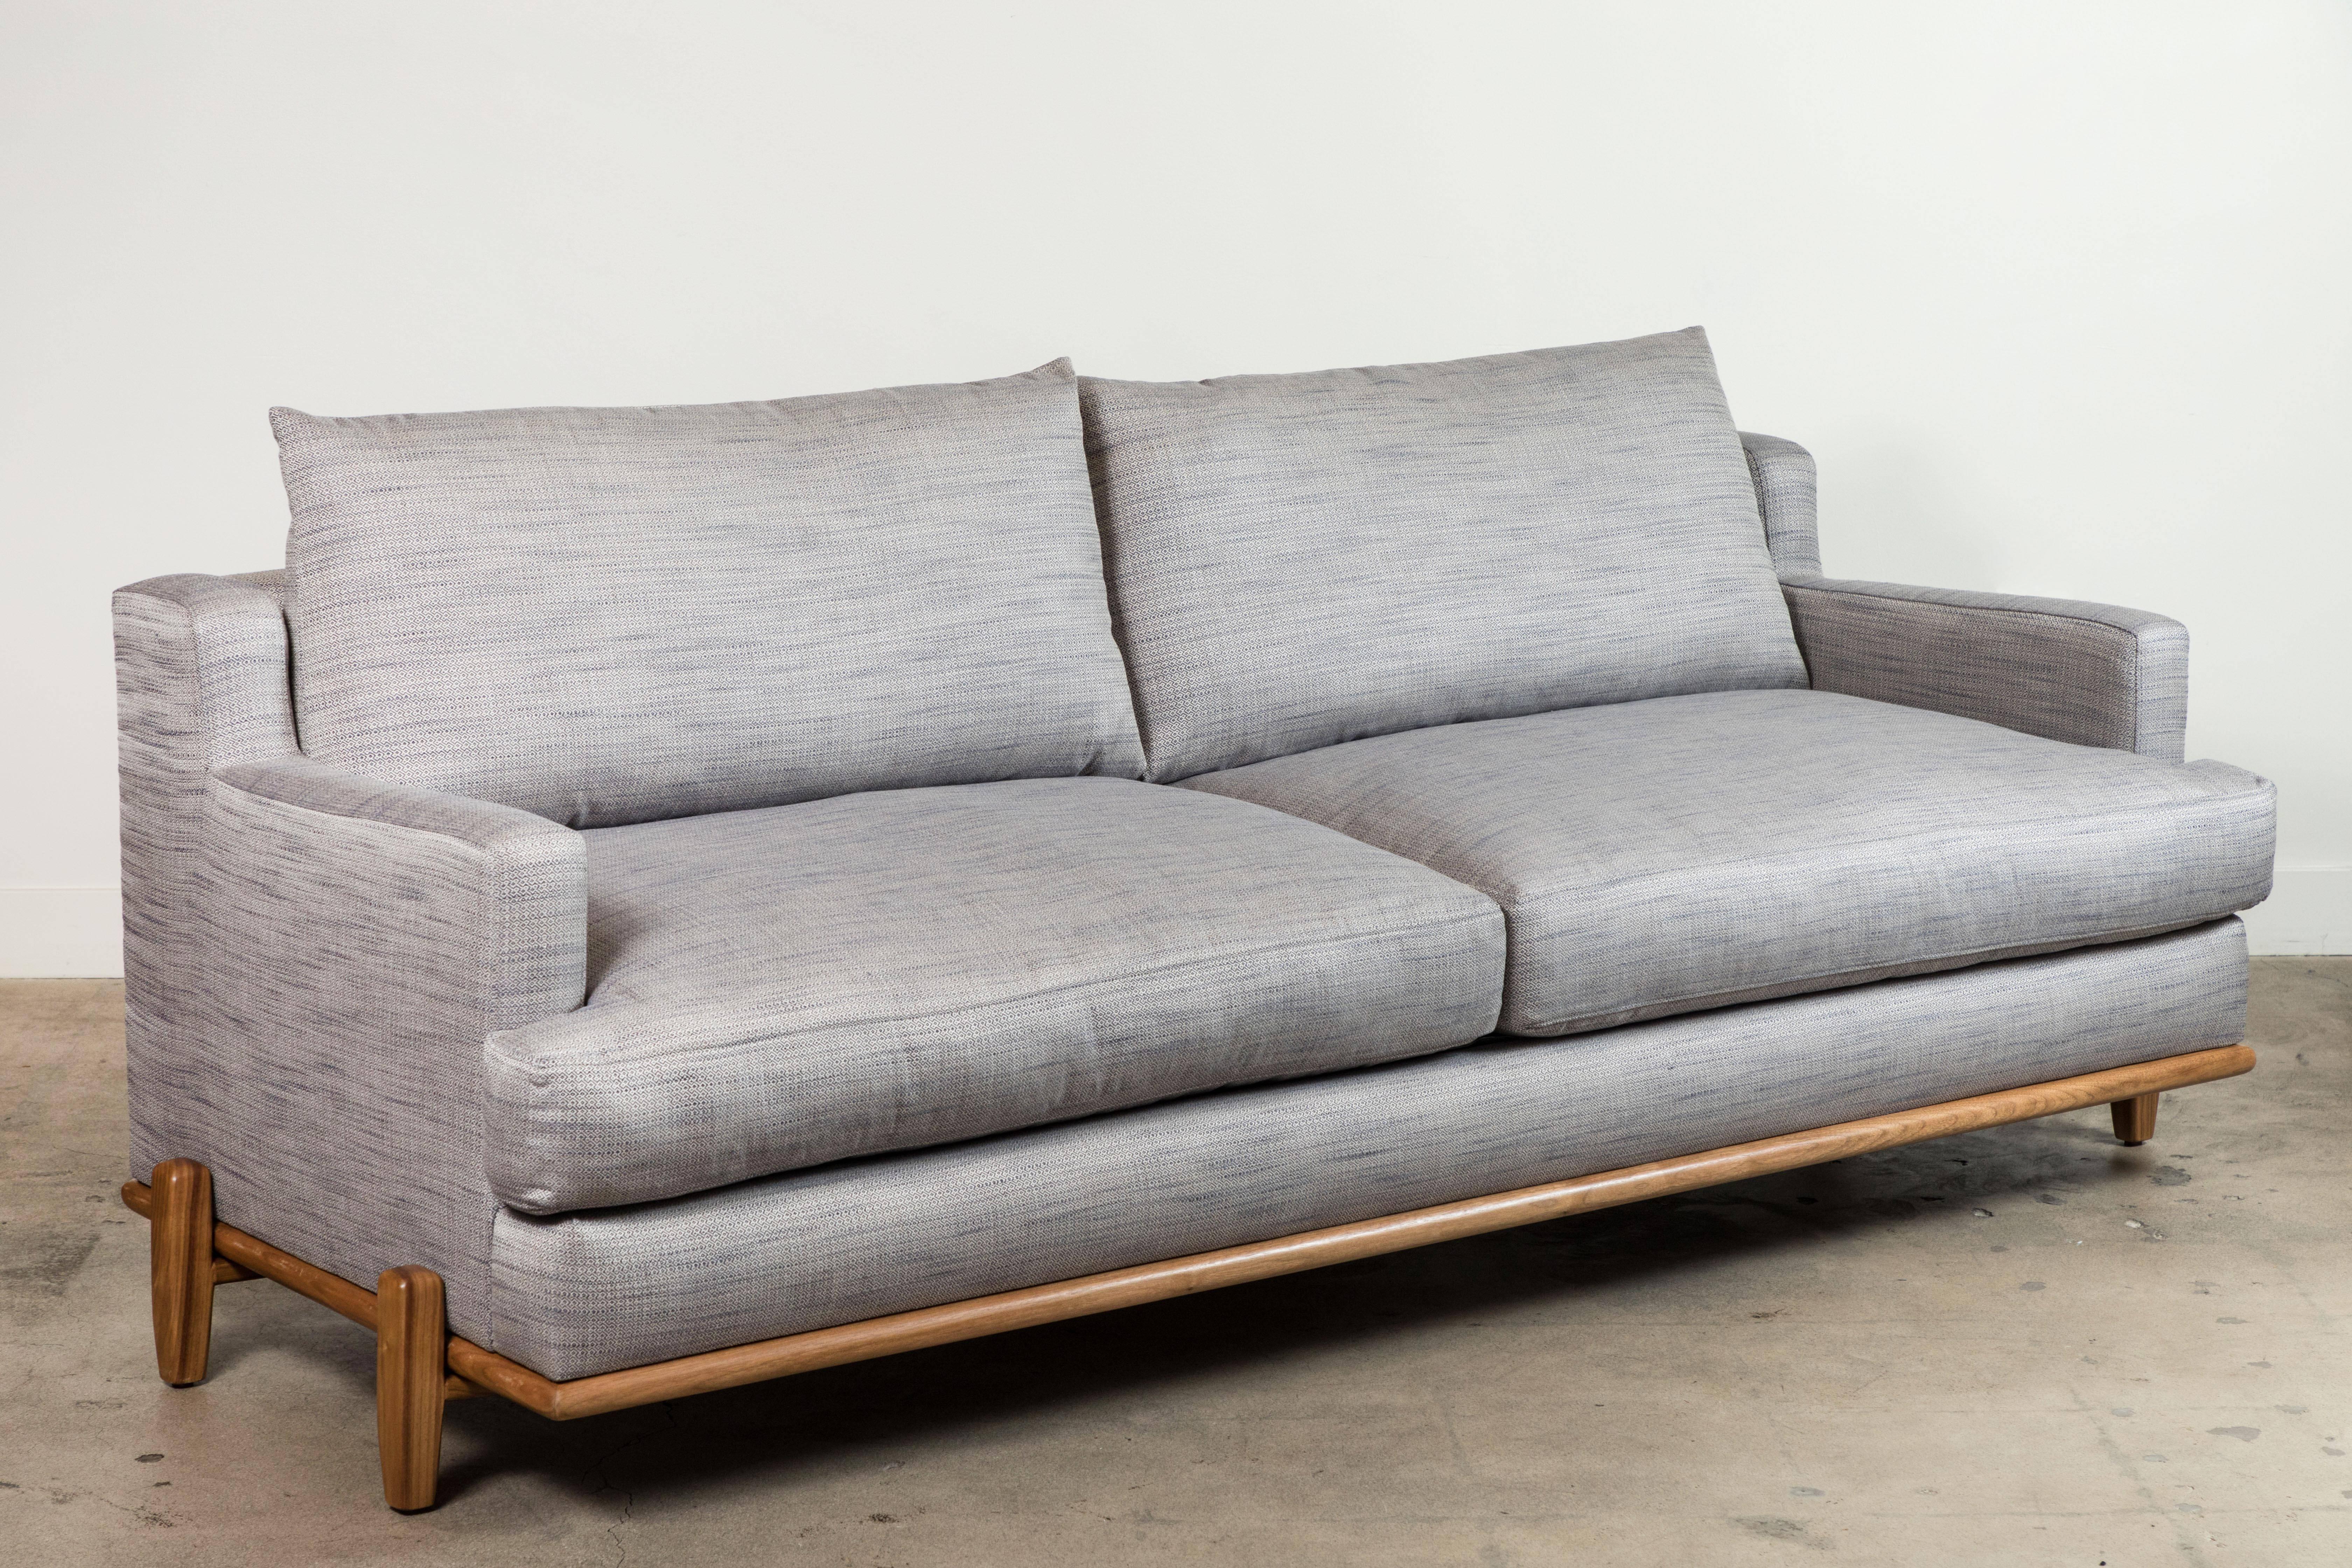 American George Sofa by Brian Paquette for Lawson-Fenning